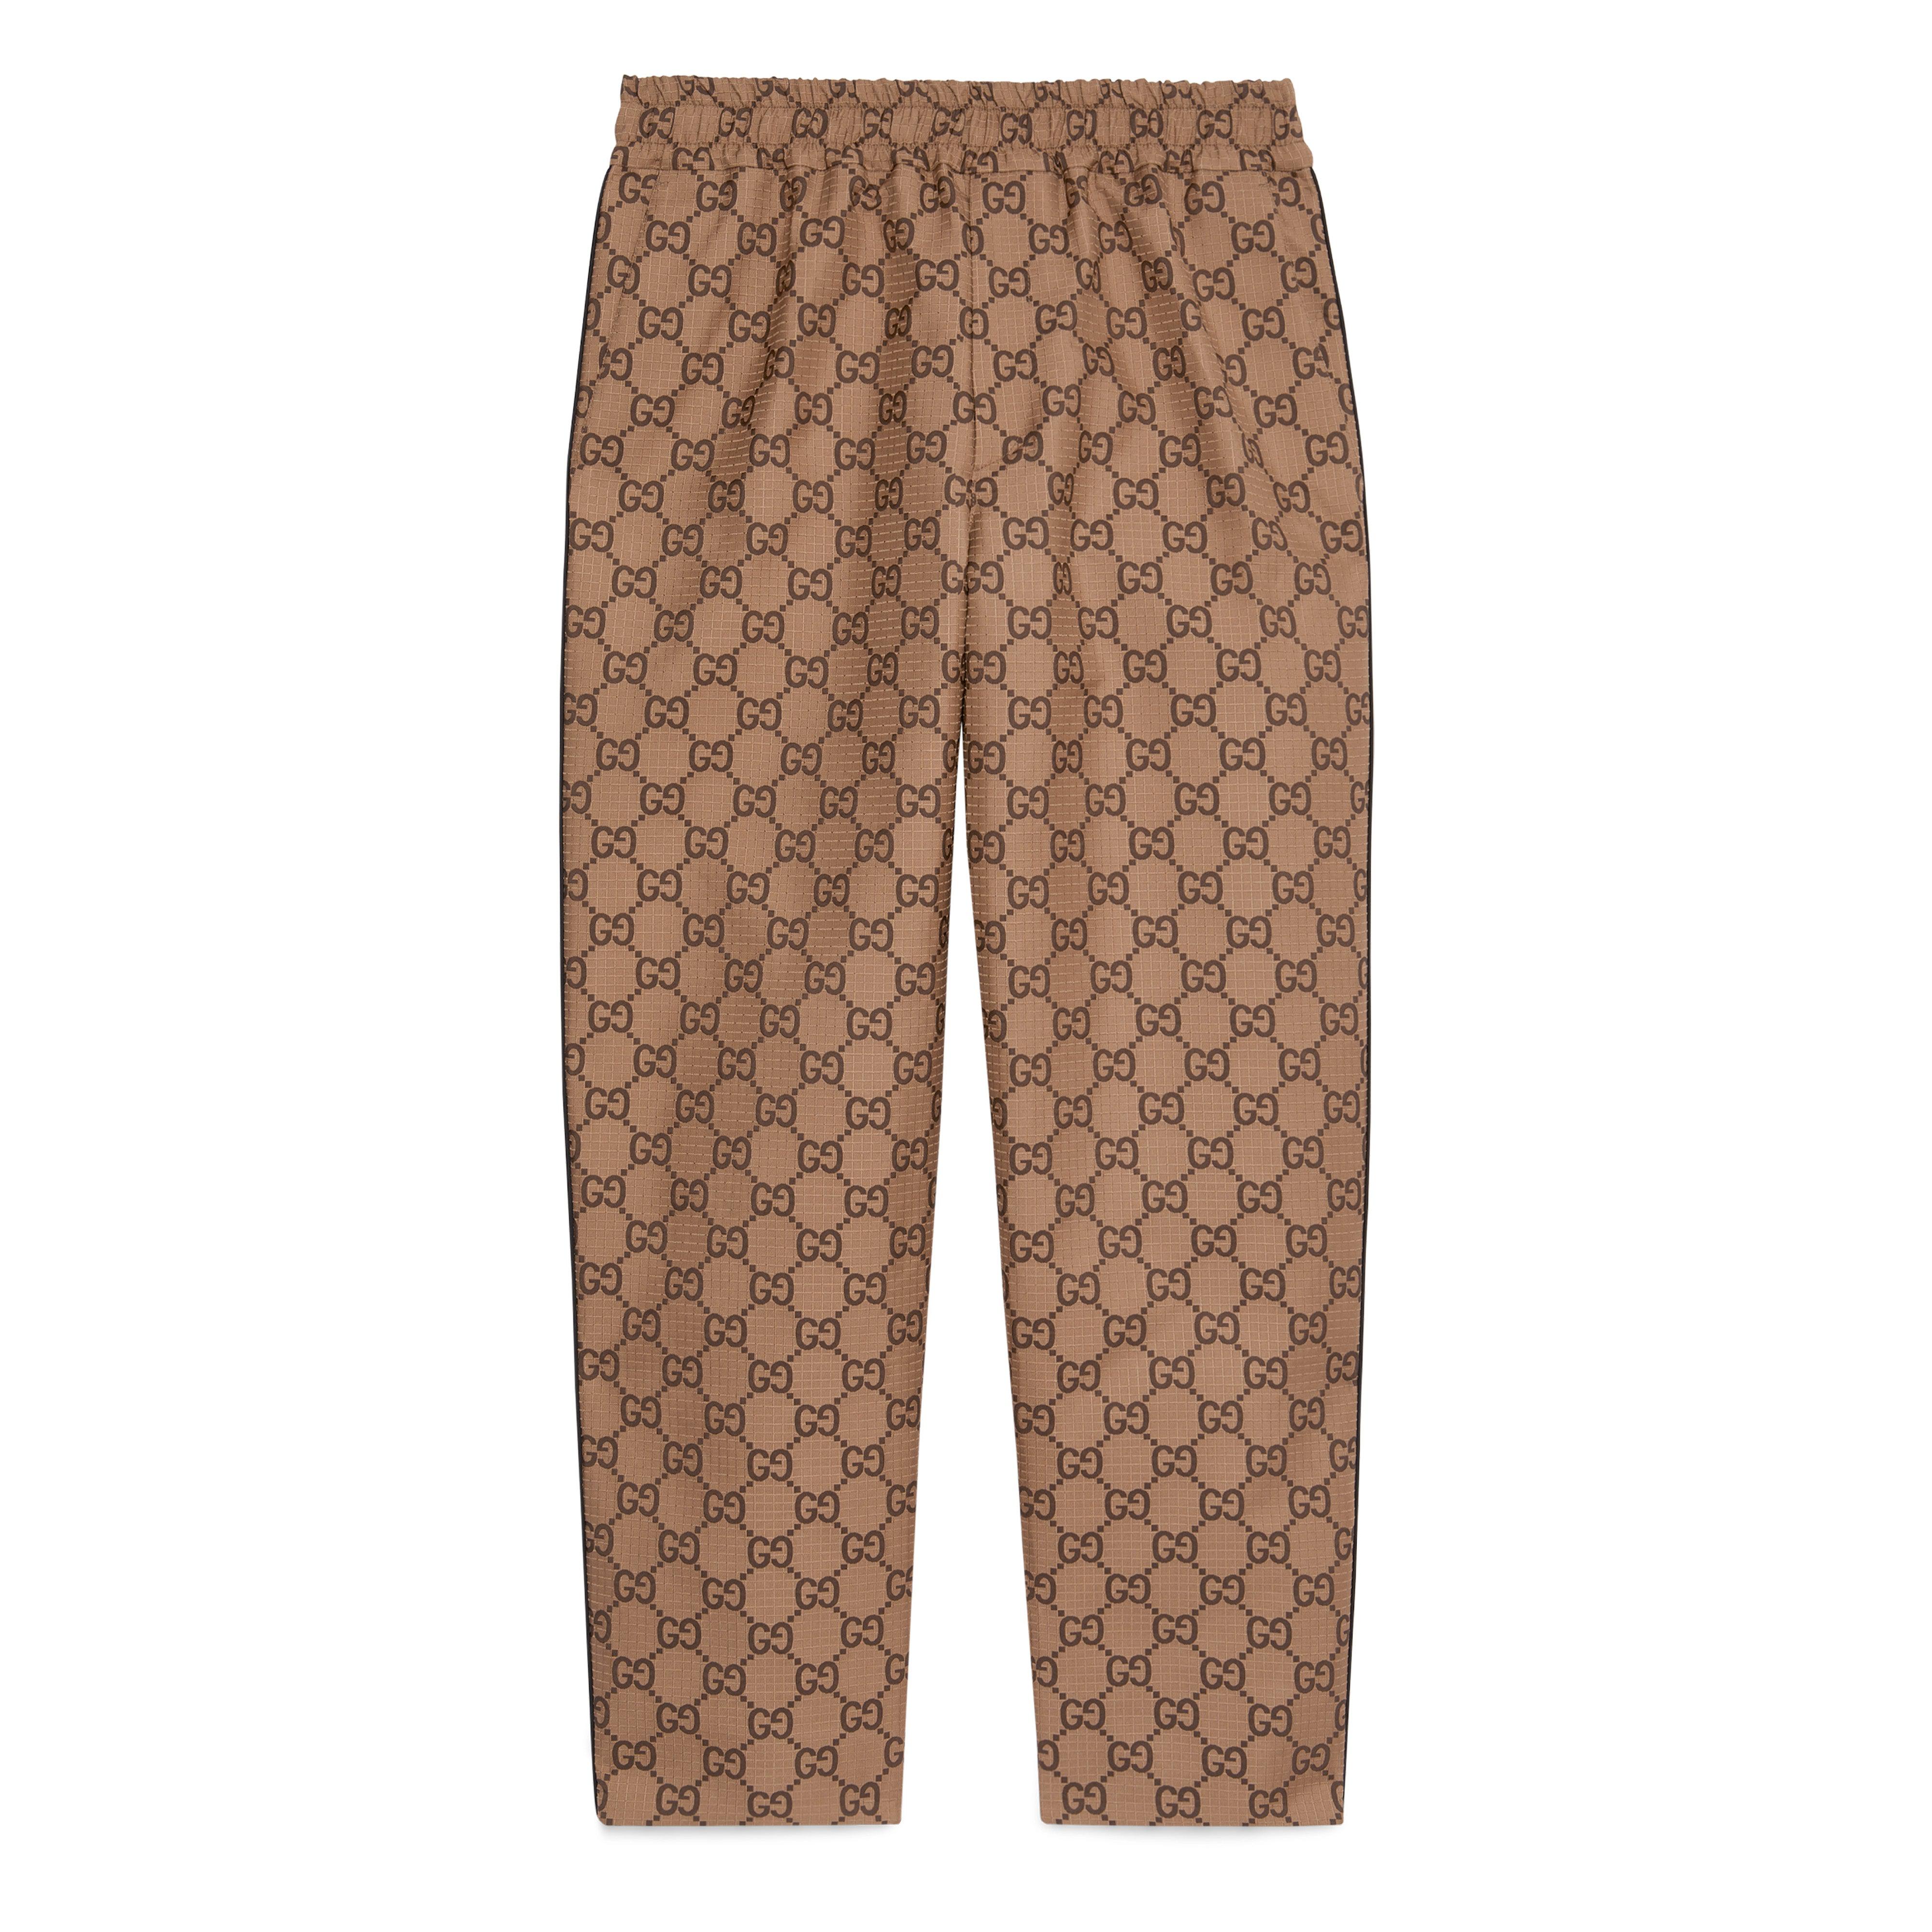 Gucci Men's GG Ripstop Trouser (Brown) by GUCCI